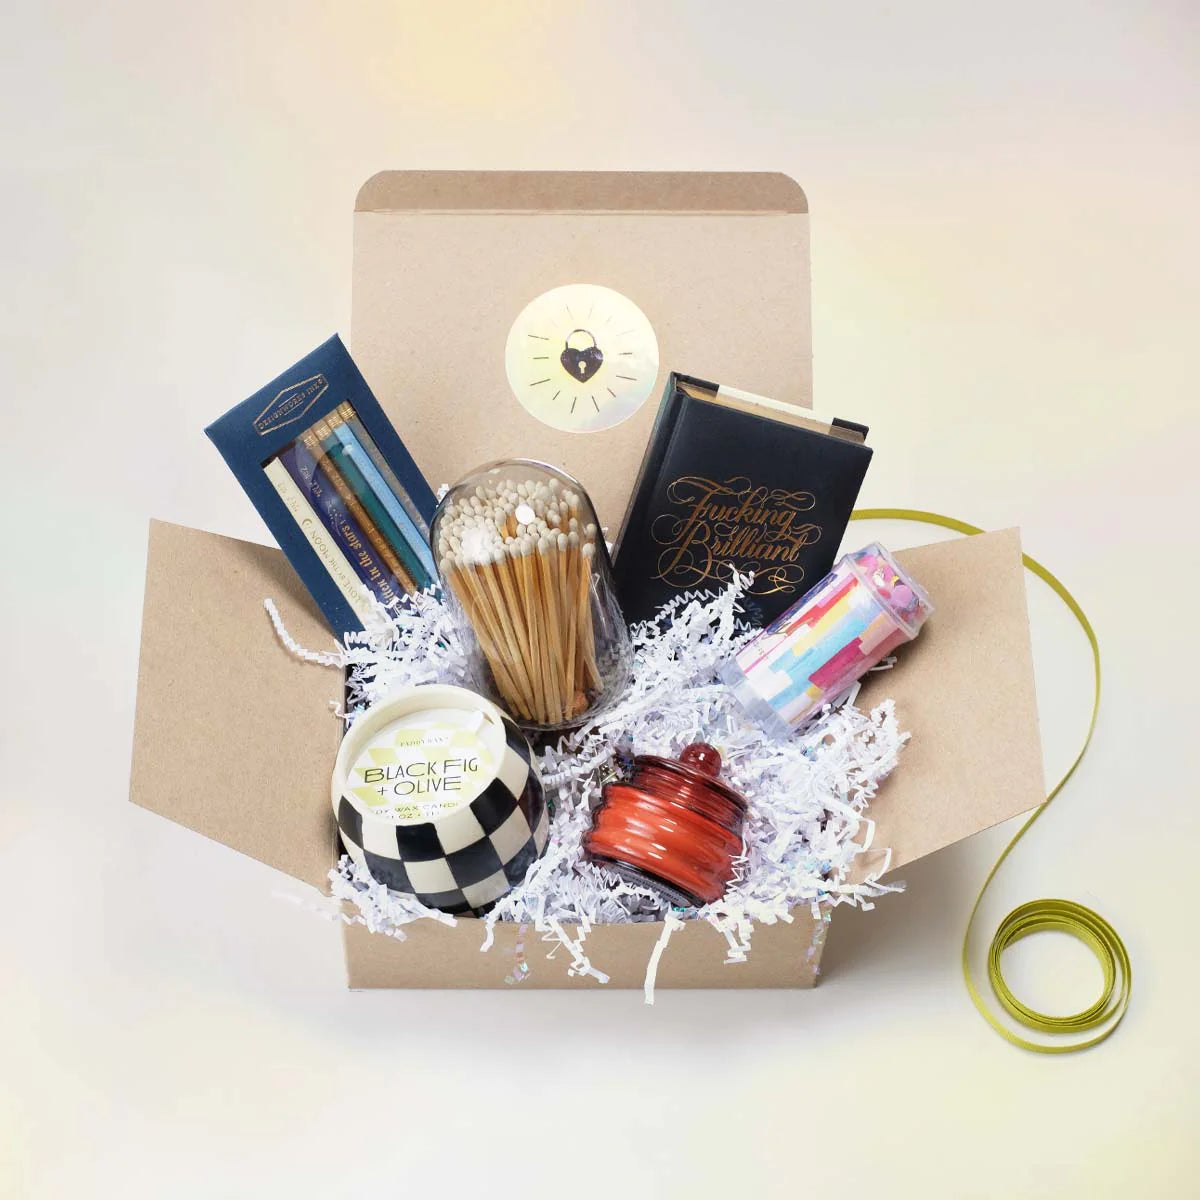 Opened gift box showcasing matches, candles, journal, and pencils as example product